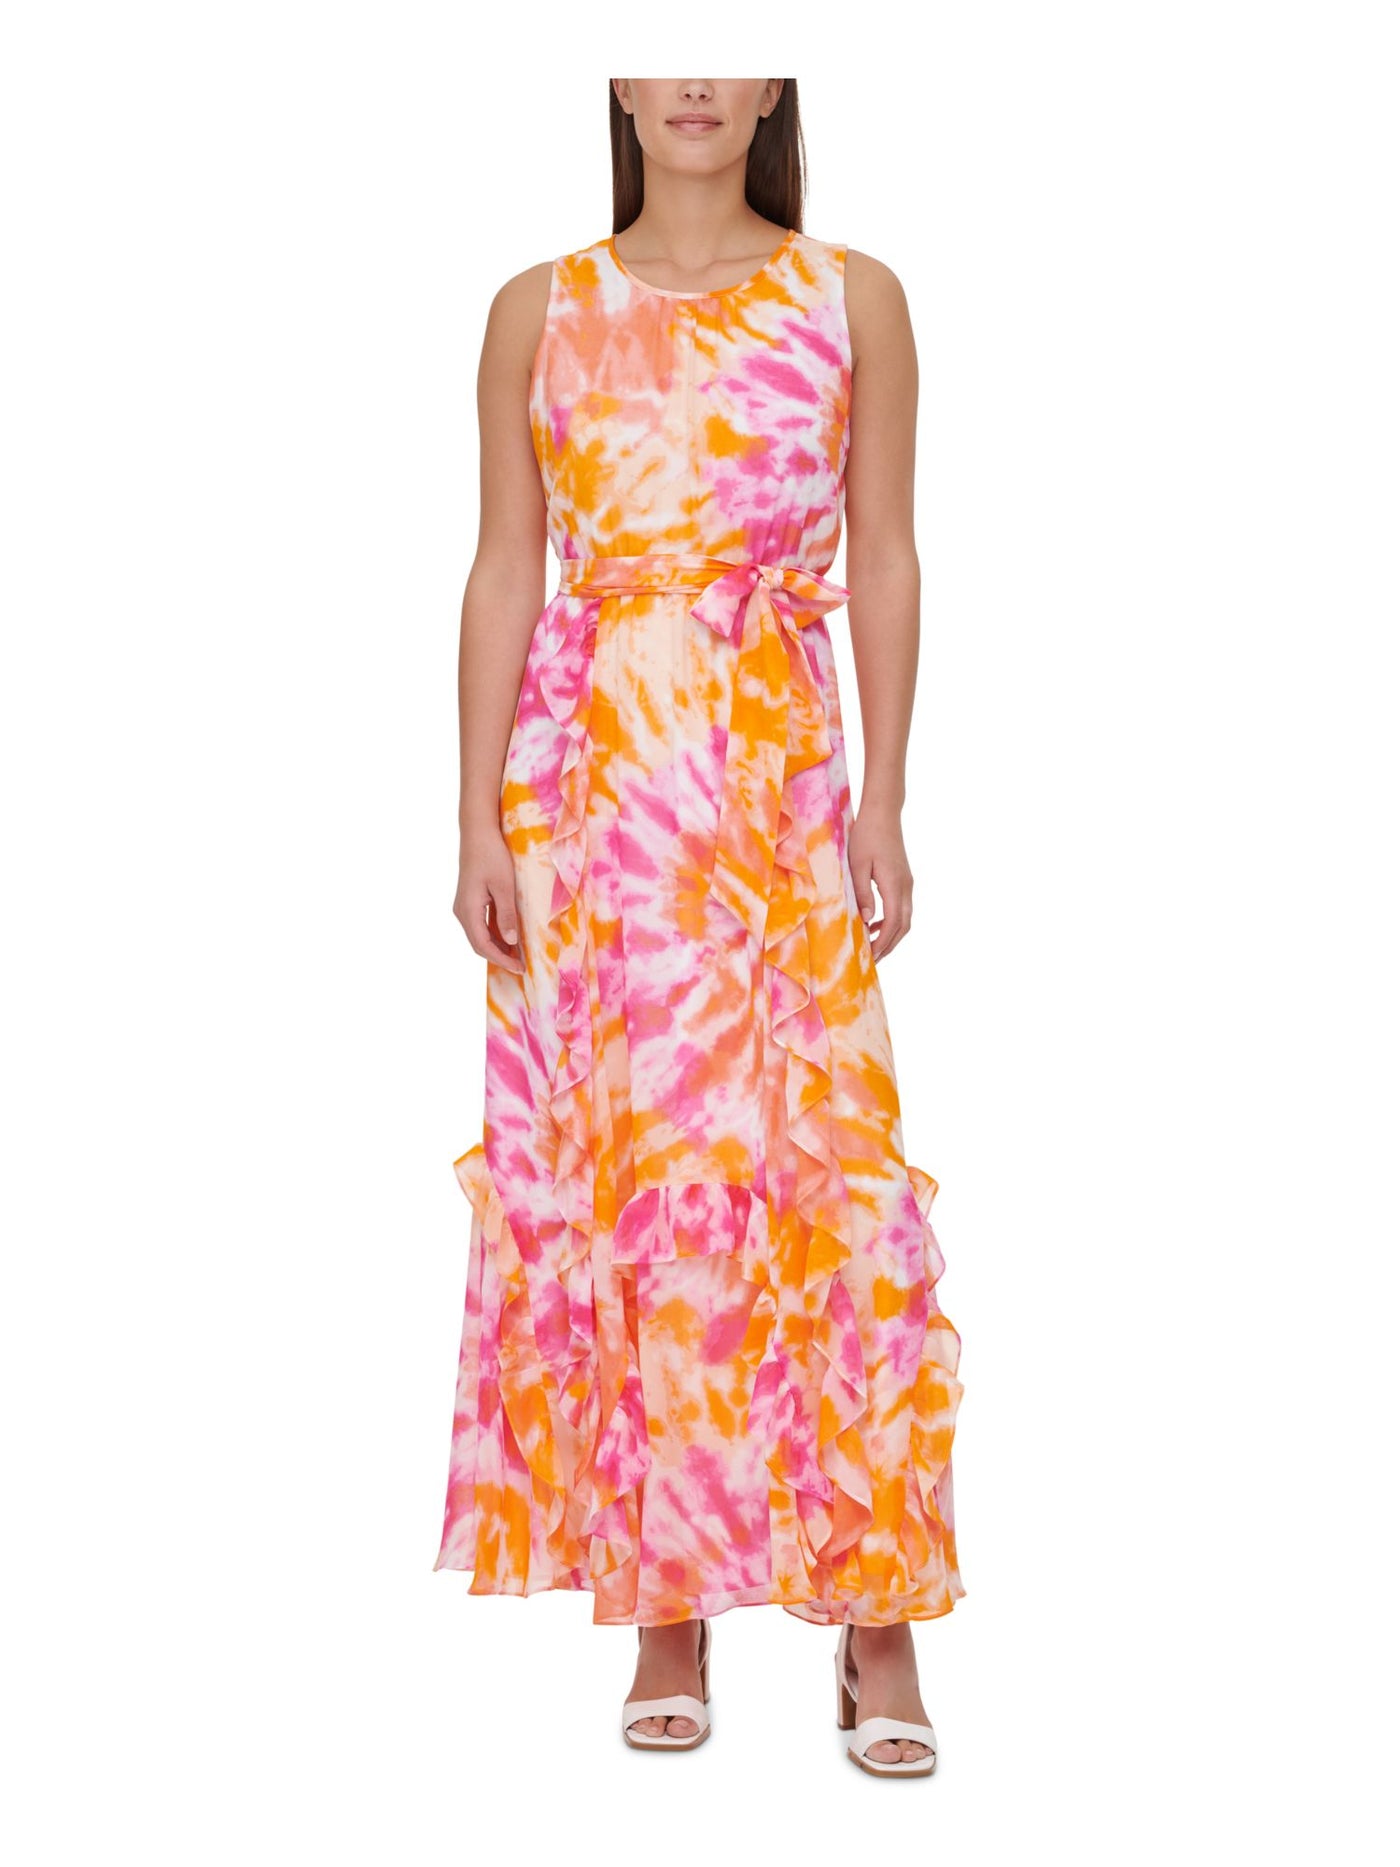 CALVIN KLEIN Womens Orange Belted Ruffled Keyhole Back Tie Dye Sleeveless Crew Neck Maxi Party Fit + Flare Dress S